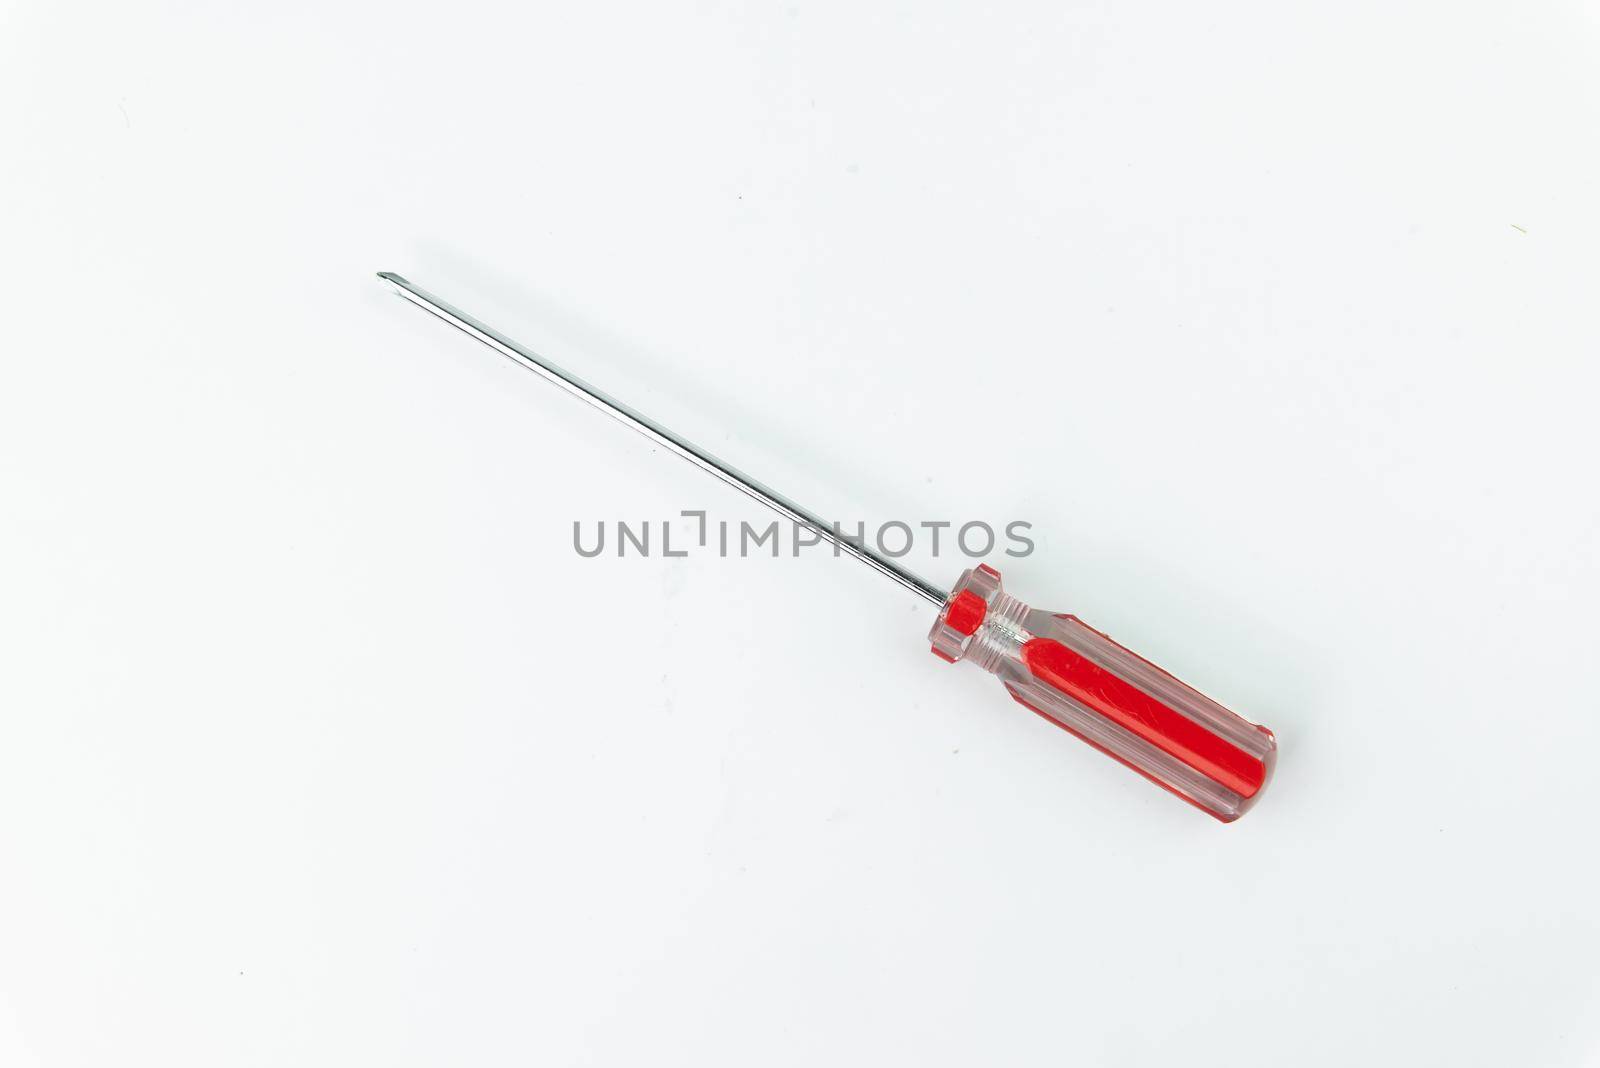 Screwdriver with red hand on white background by Wmpix